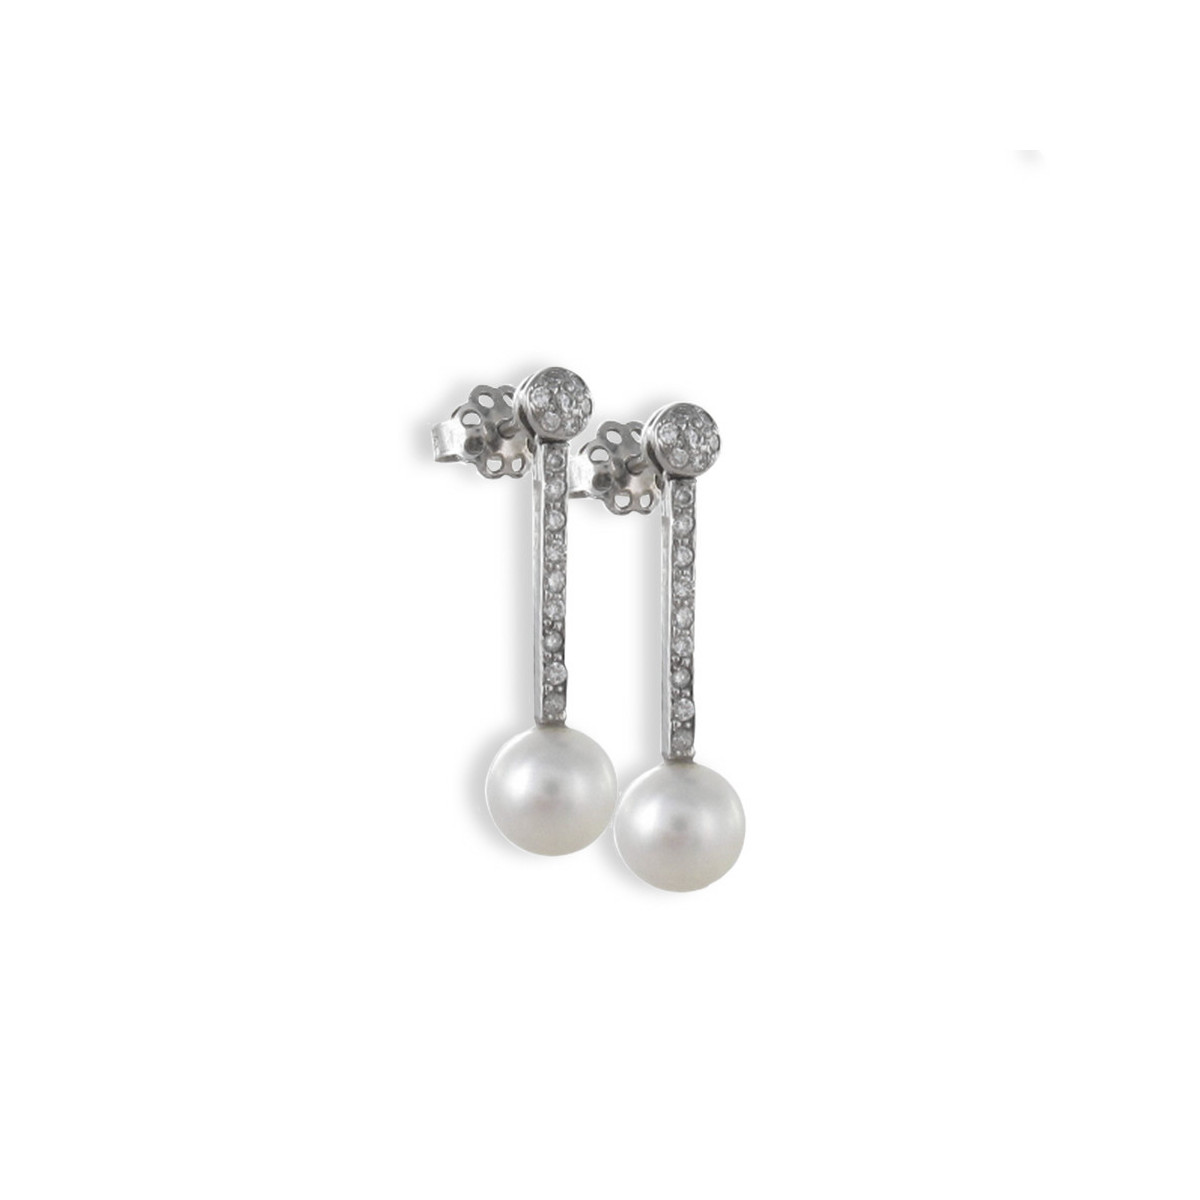 WHITE GOLD EARRINGS WITH DIAMONDS AND PEARL